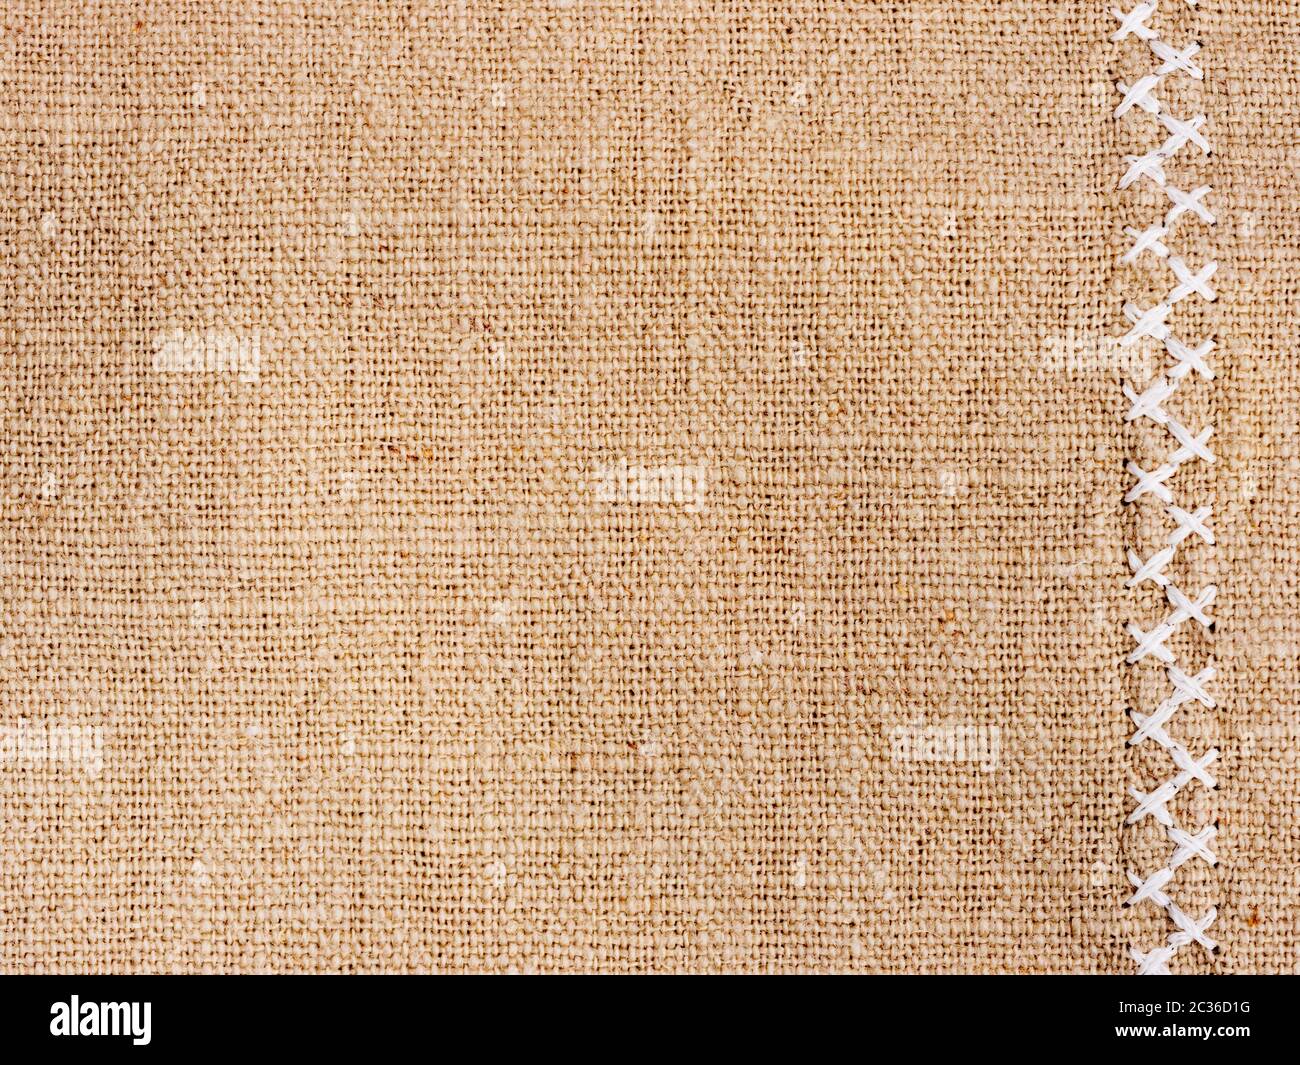 Natural cotton fabric with cross stitch close up as background texture Stock Photo